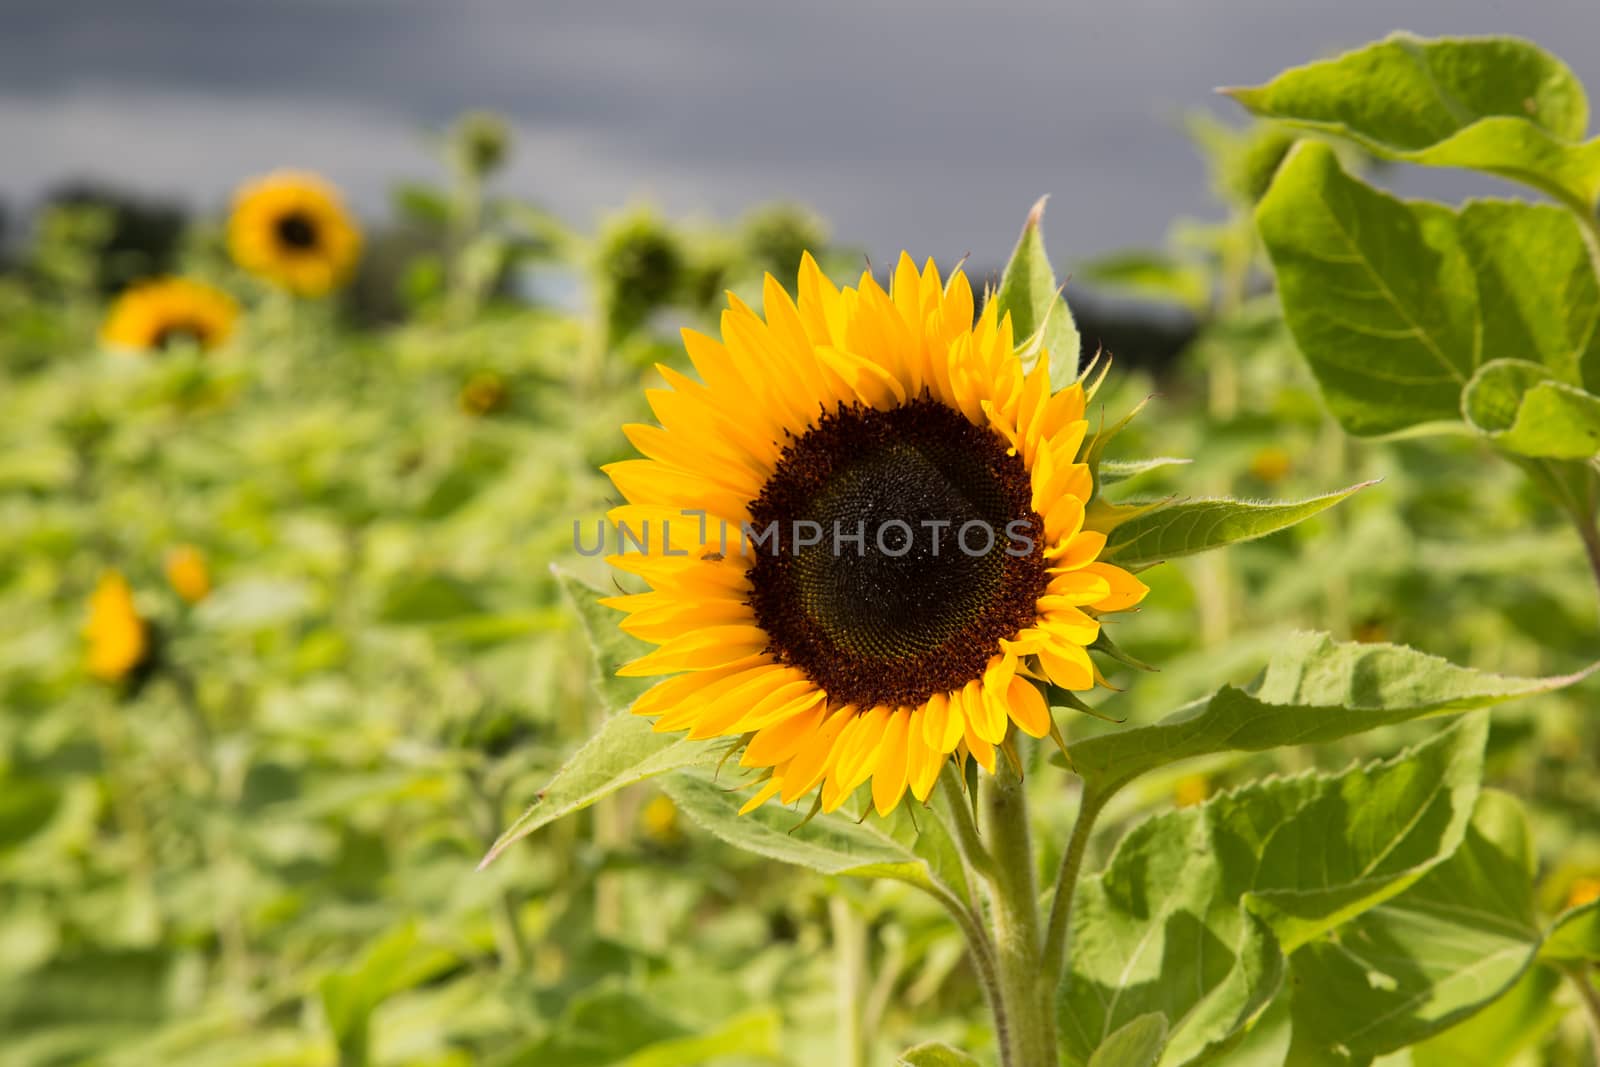 Sunflowers green and yellow by 25ehaag6